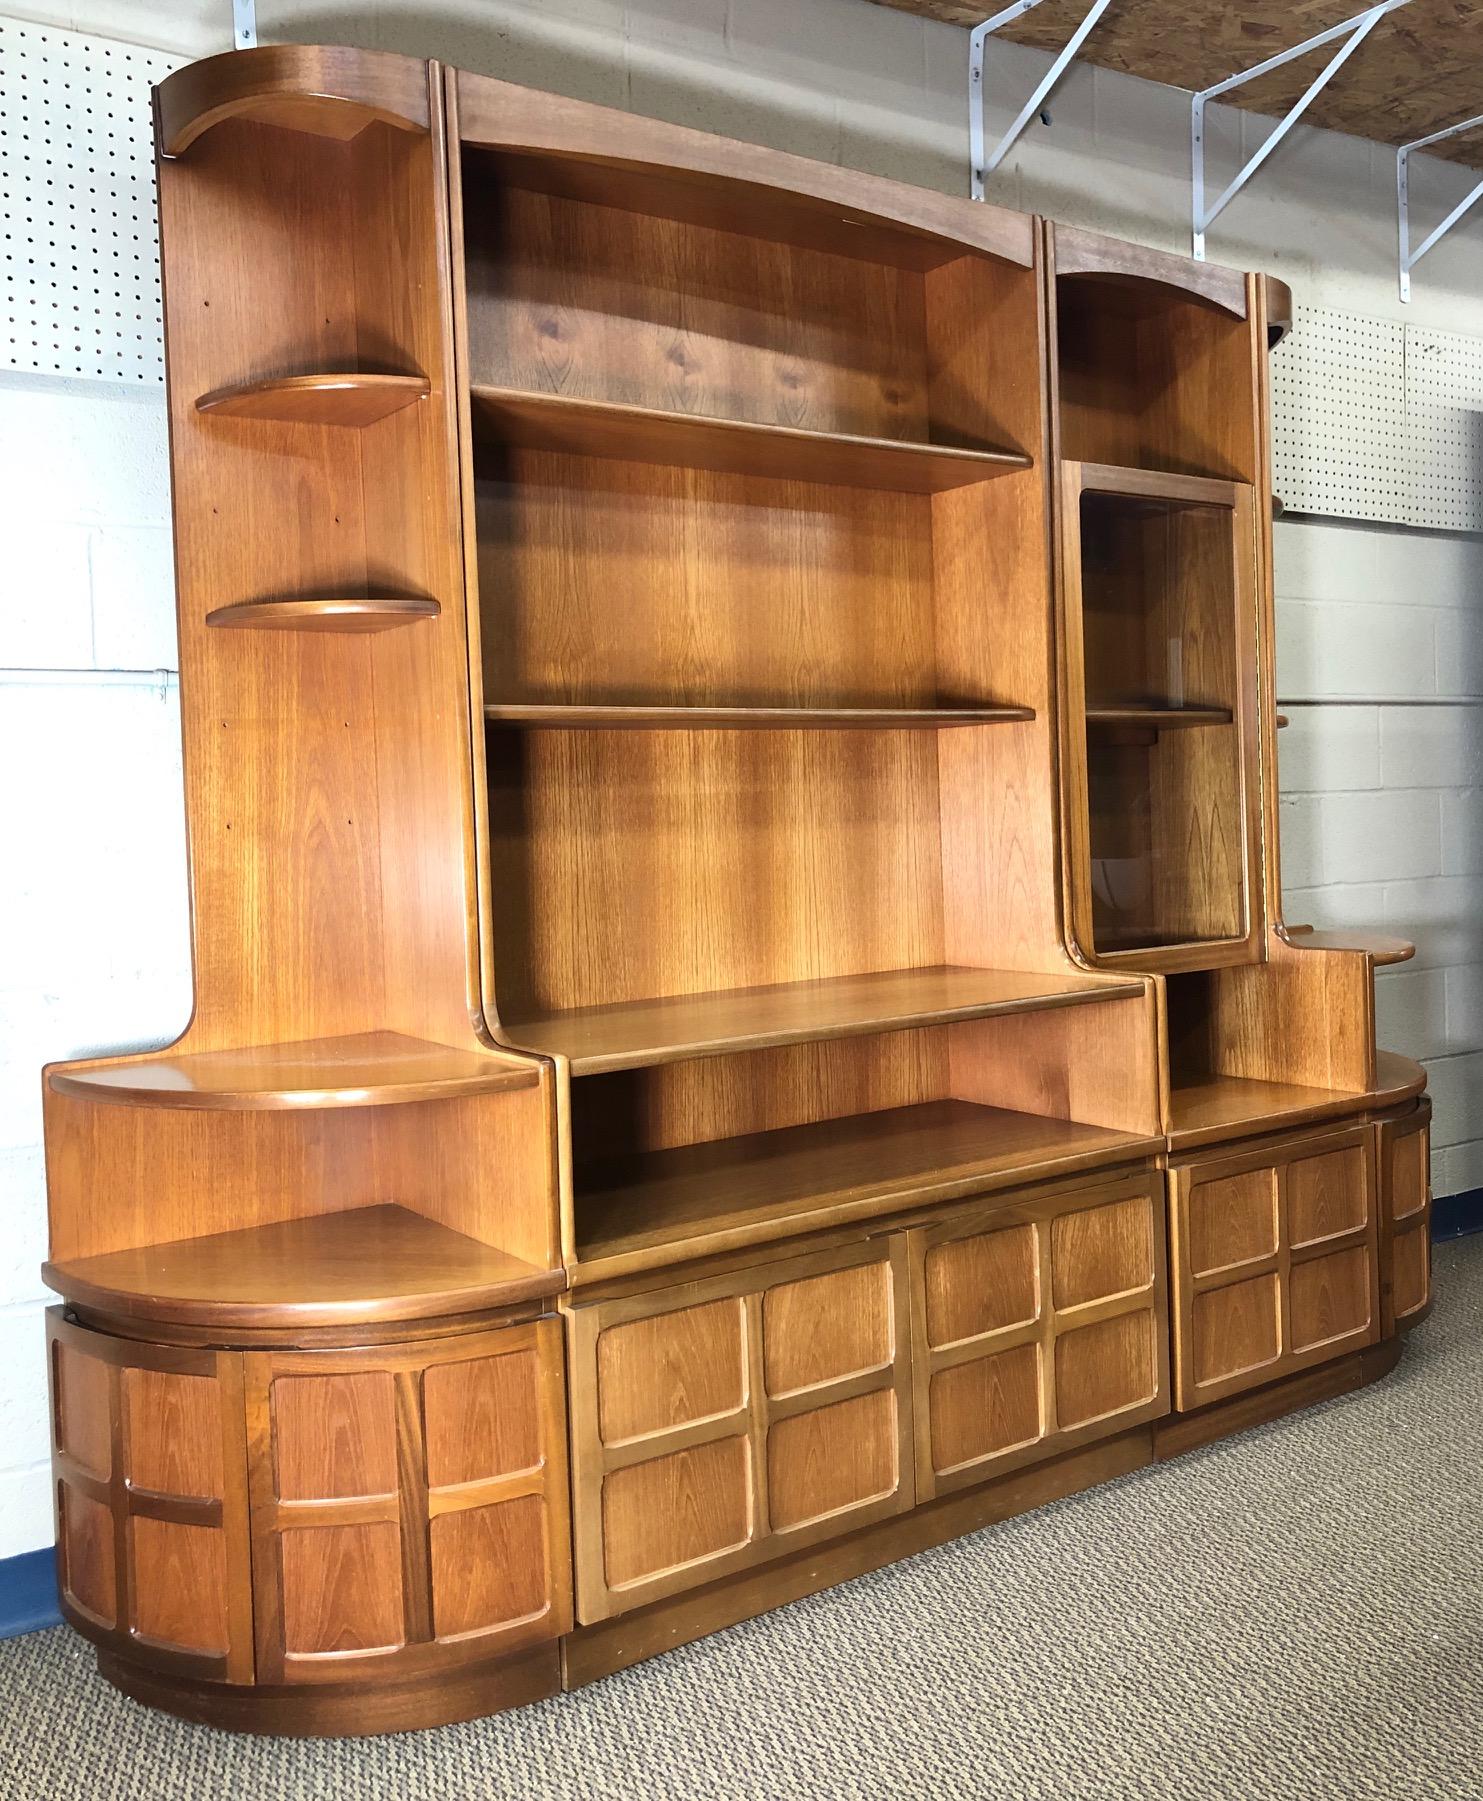 Fantastic teak wall unit made by Nathan Furniture. Made in England.

Features 2 smaller corner units and 2 main units. The corner shelves are adjustable. Original labels and tags are attached. The indivdual units may have been purchased a